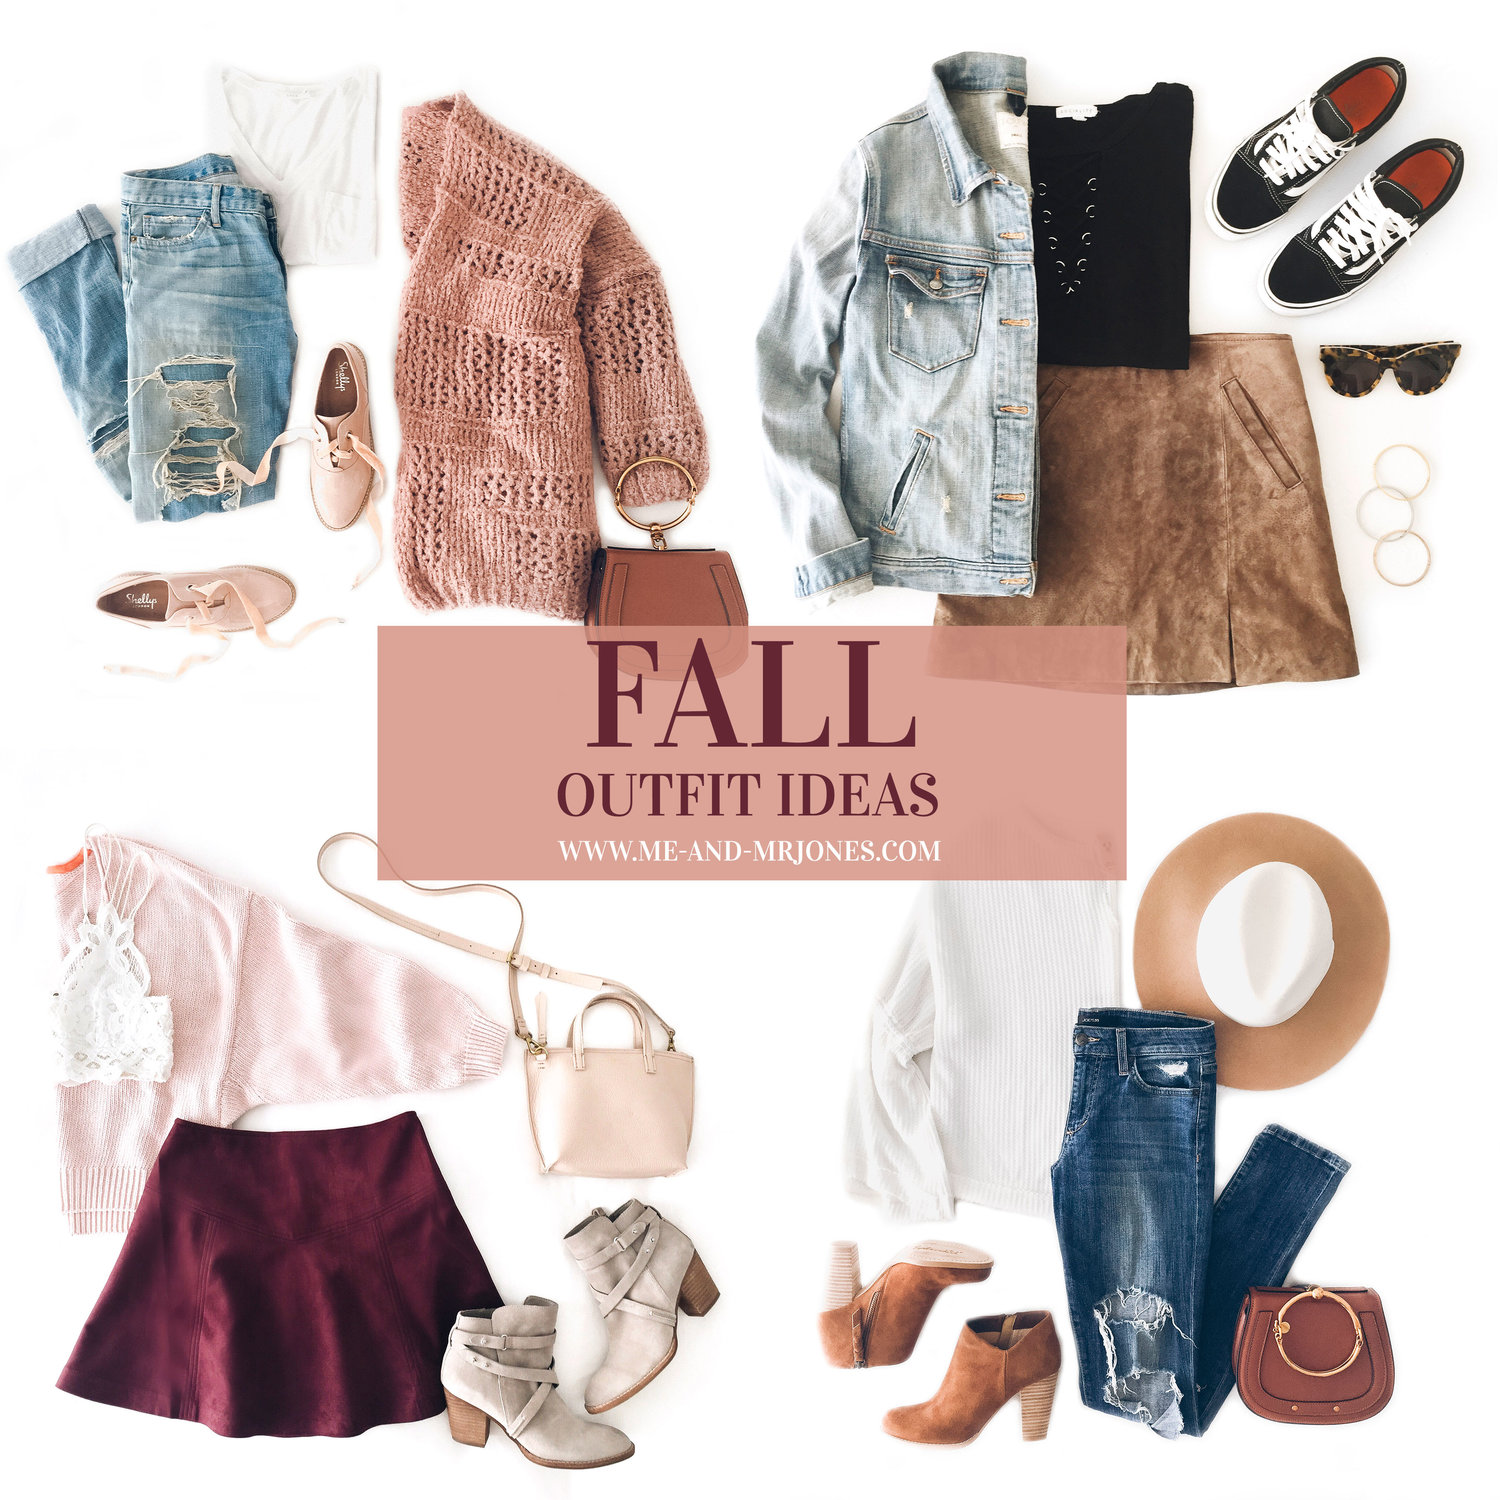 Cute Fall Outfits: What to Wear This Fall - YesMissy